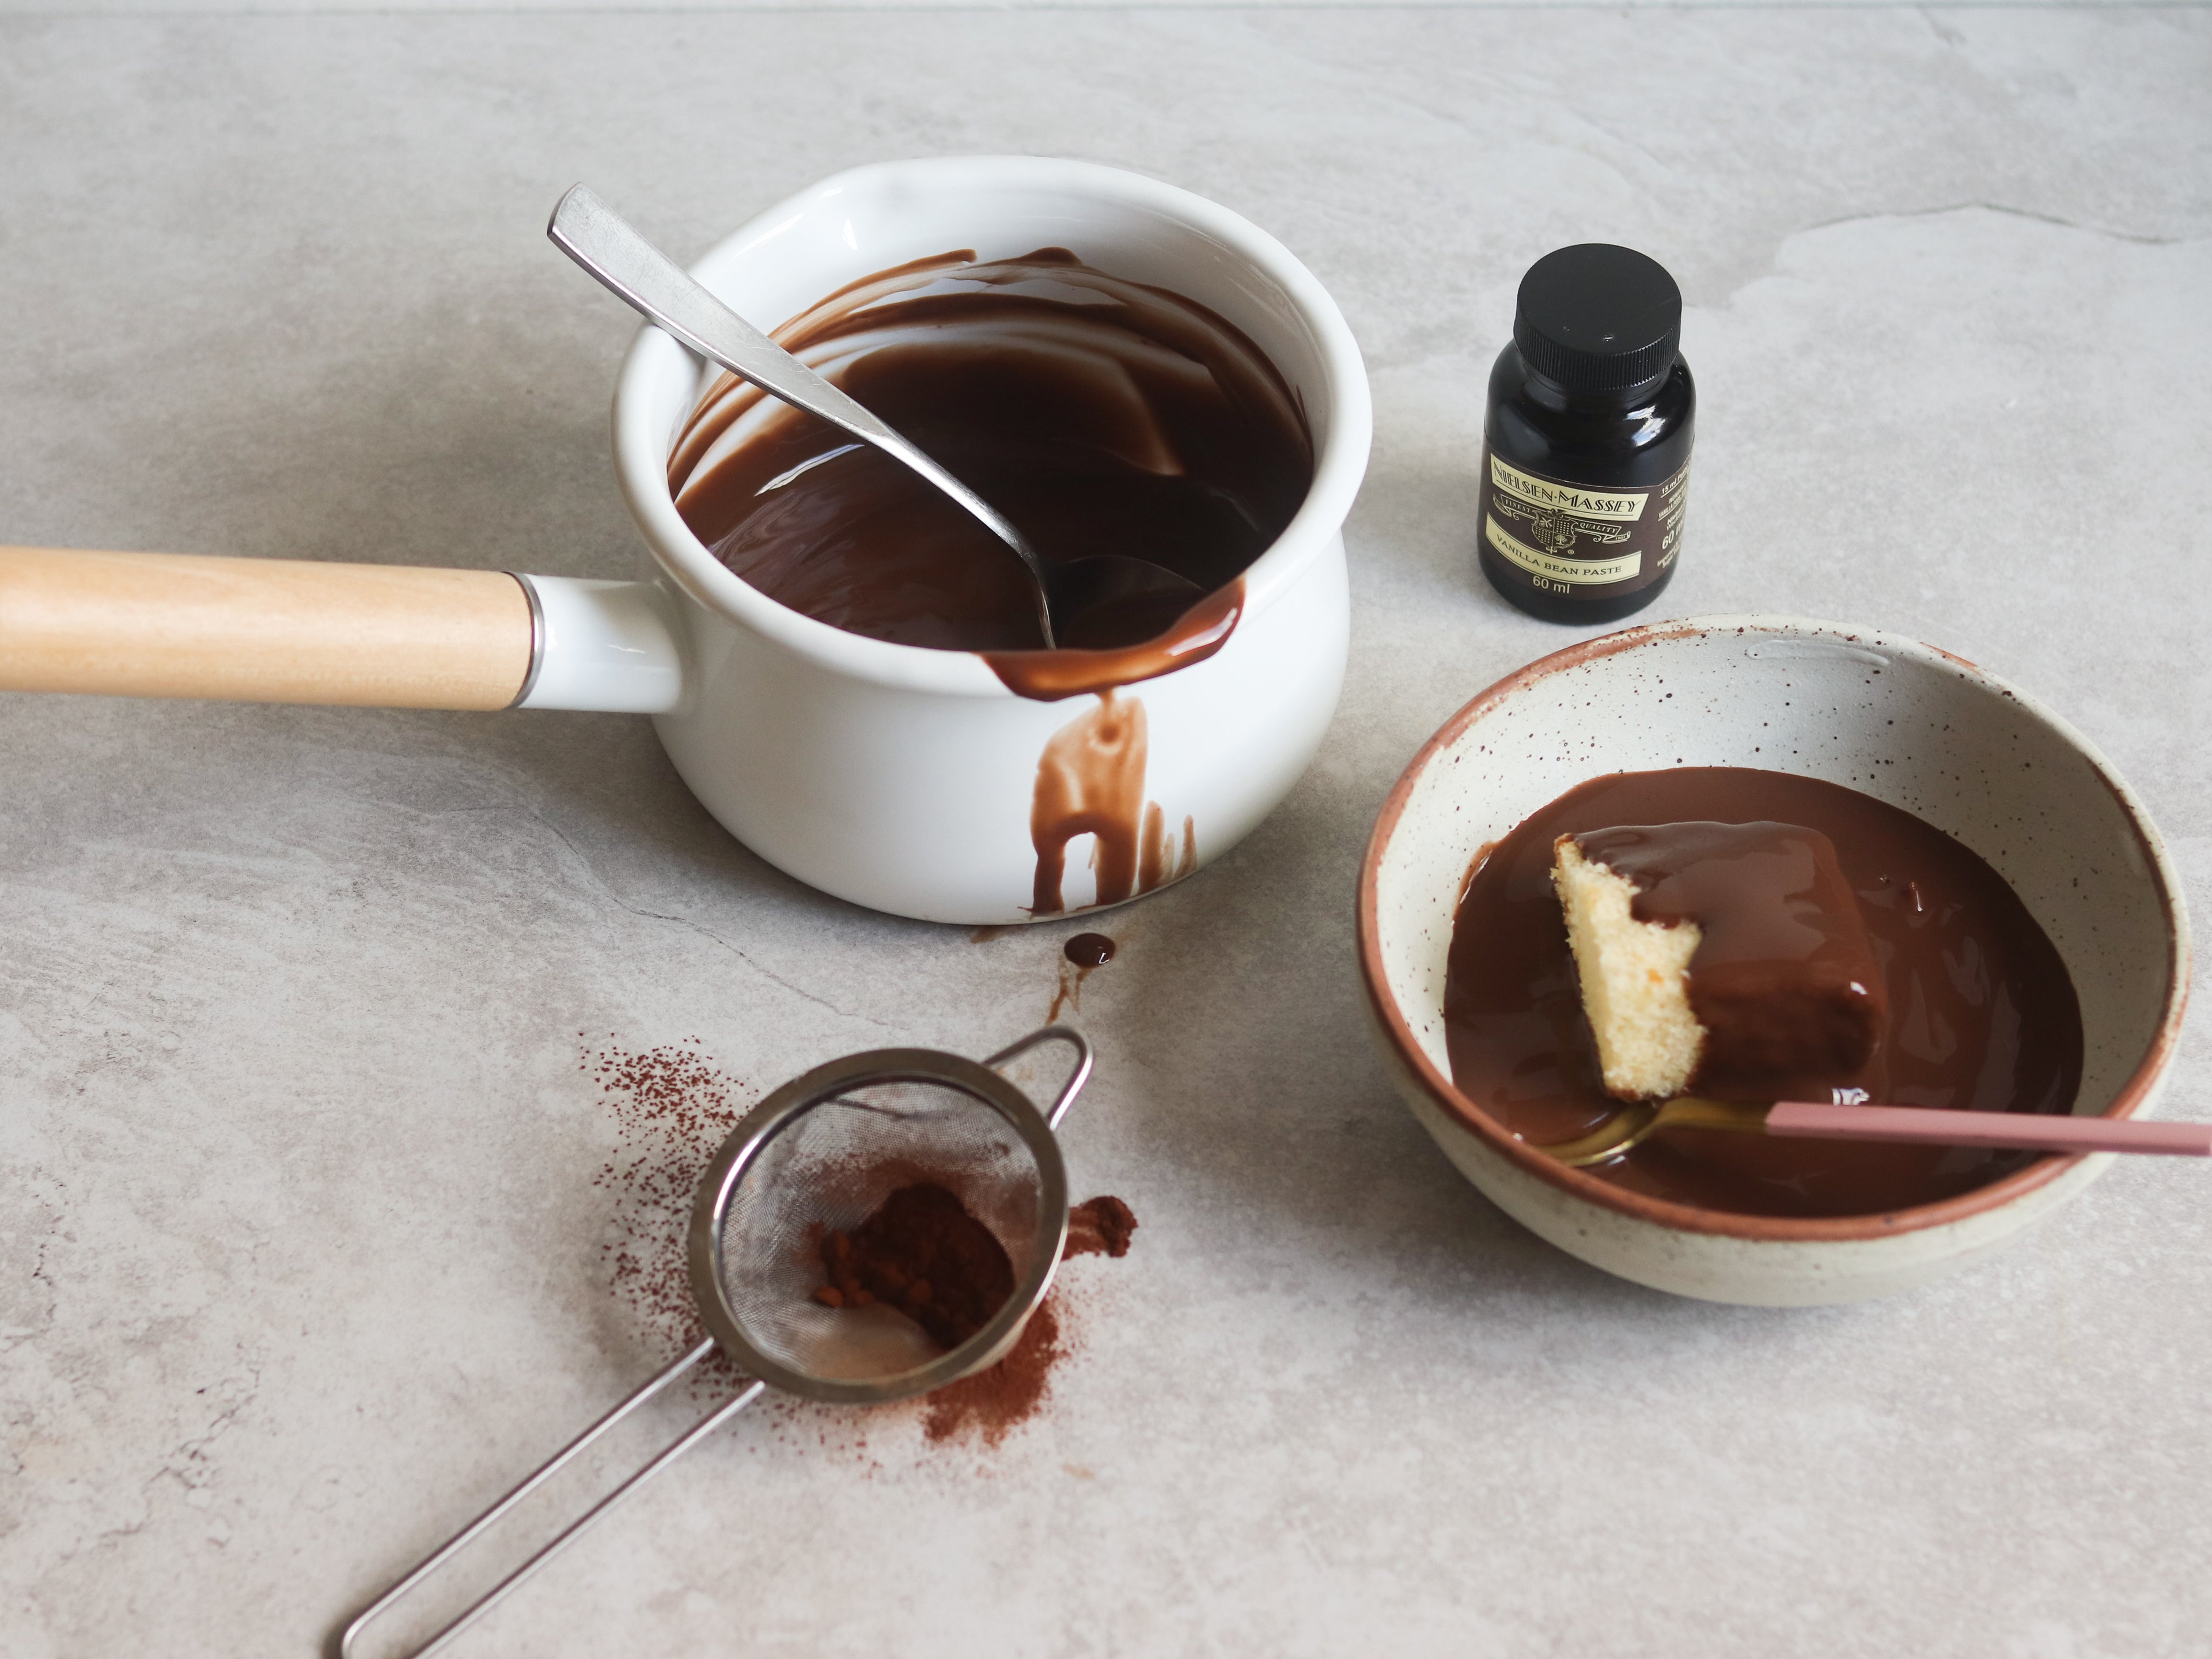 Saucepan of Chocolate Custard with drips down the side, next to a sieve with cocoa powder, and a bowl of sponge cake covered in Chocolate Custard with a spoon. Bottle of Neilsen-Massey Vanilla Extract in the background